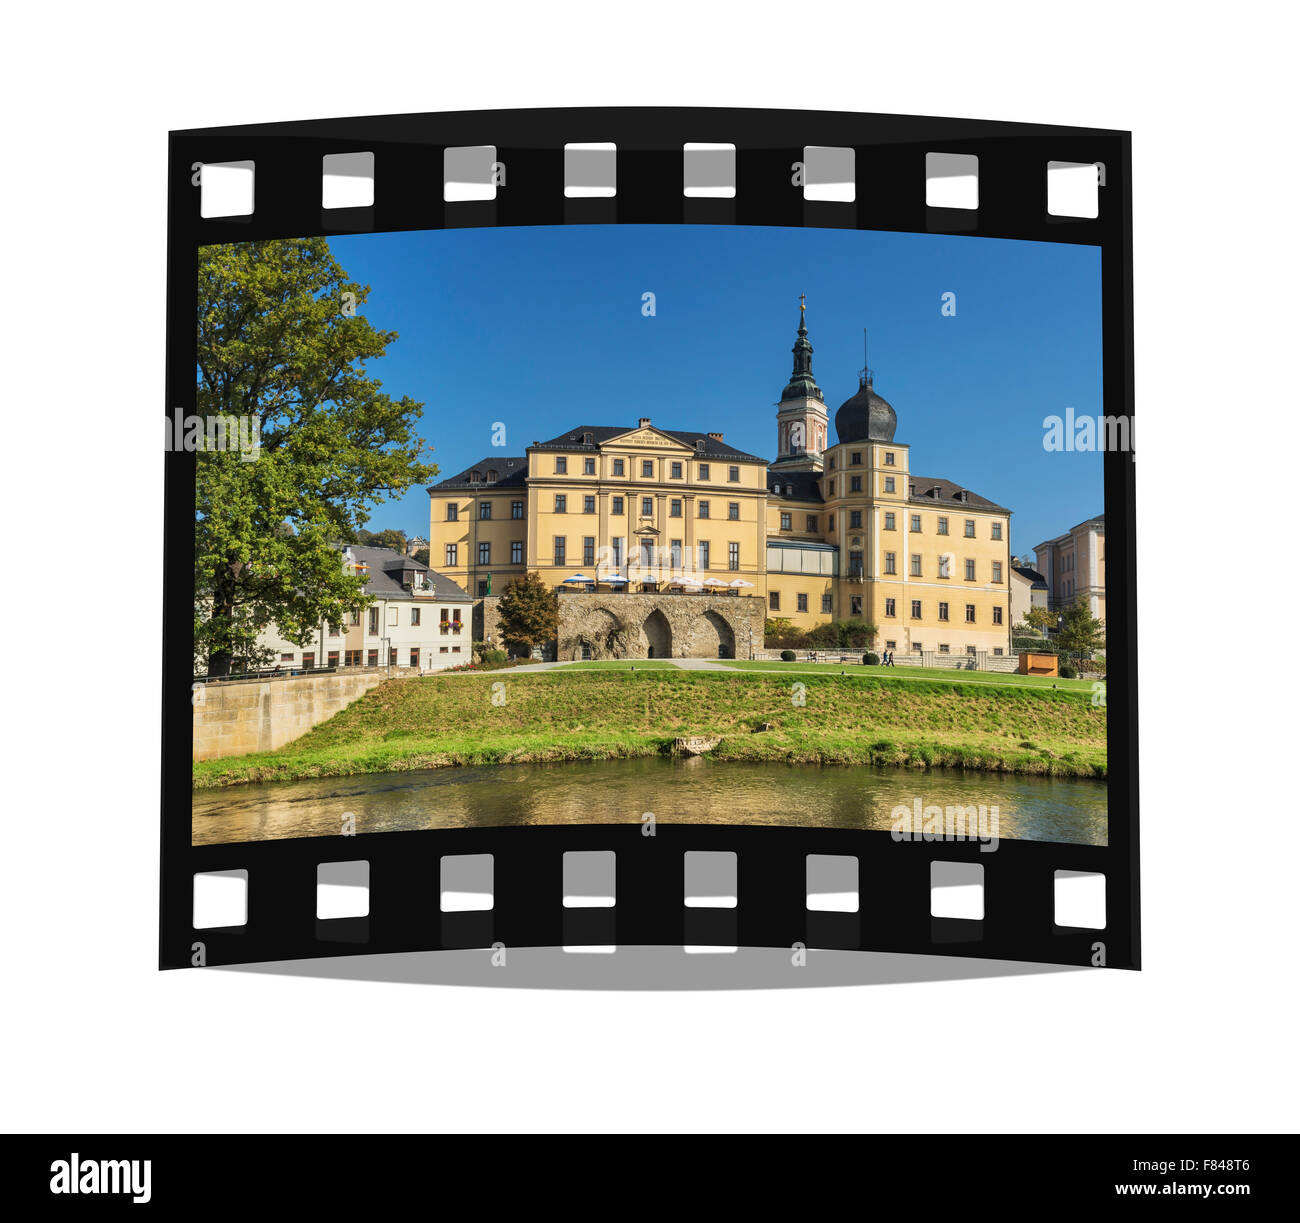 The Lower Castle is situated on the banks of the White Elster, next to the St. Marys Church, Greiz, Thuringia, Germany, Europe Stock Photo